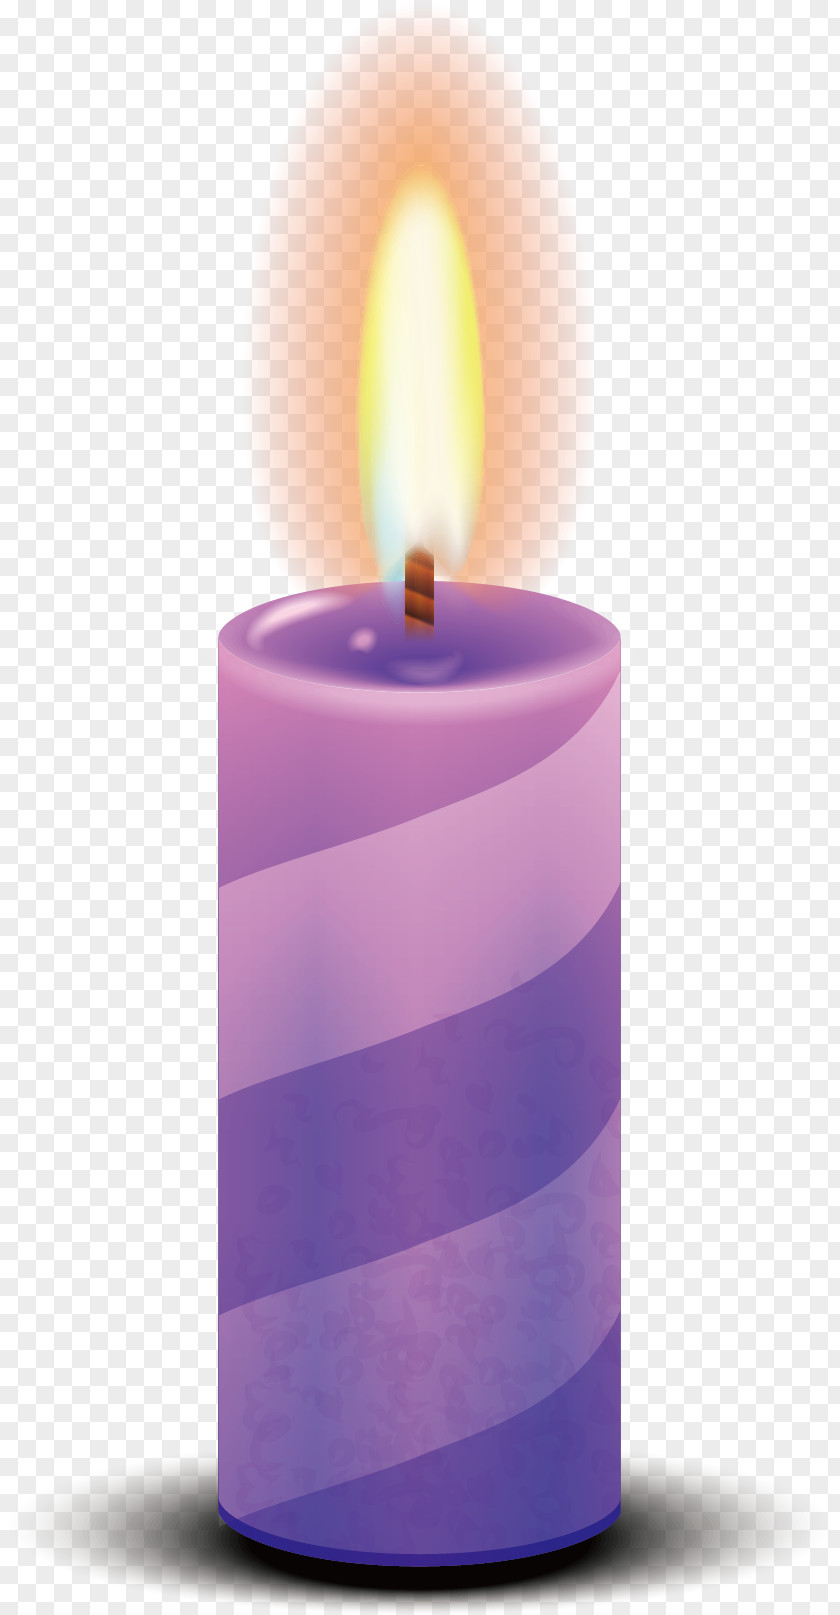 Candle Material Light PNG